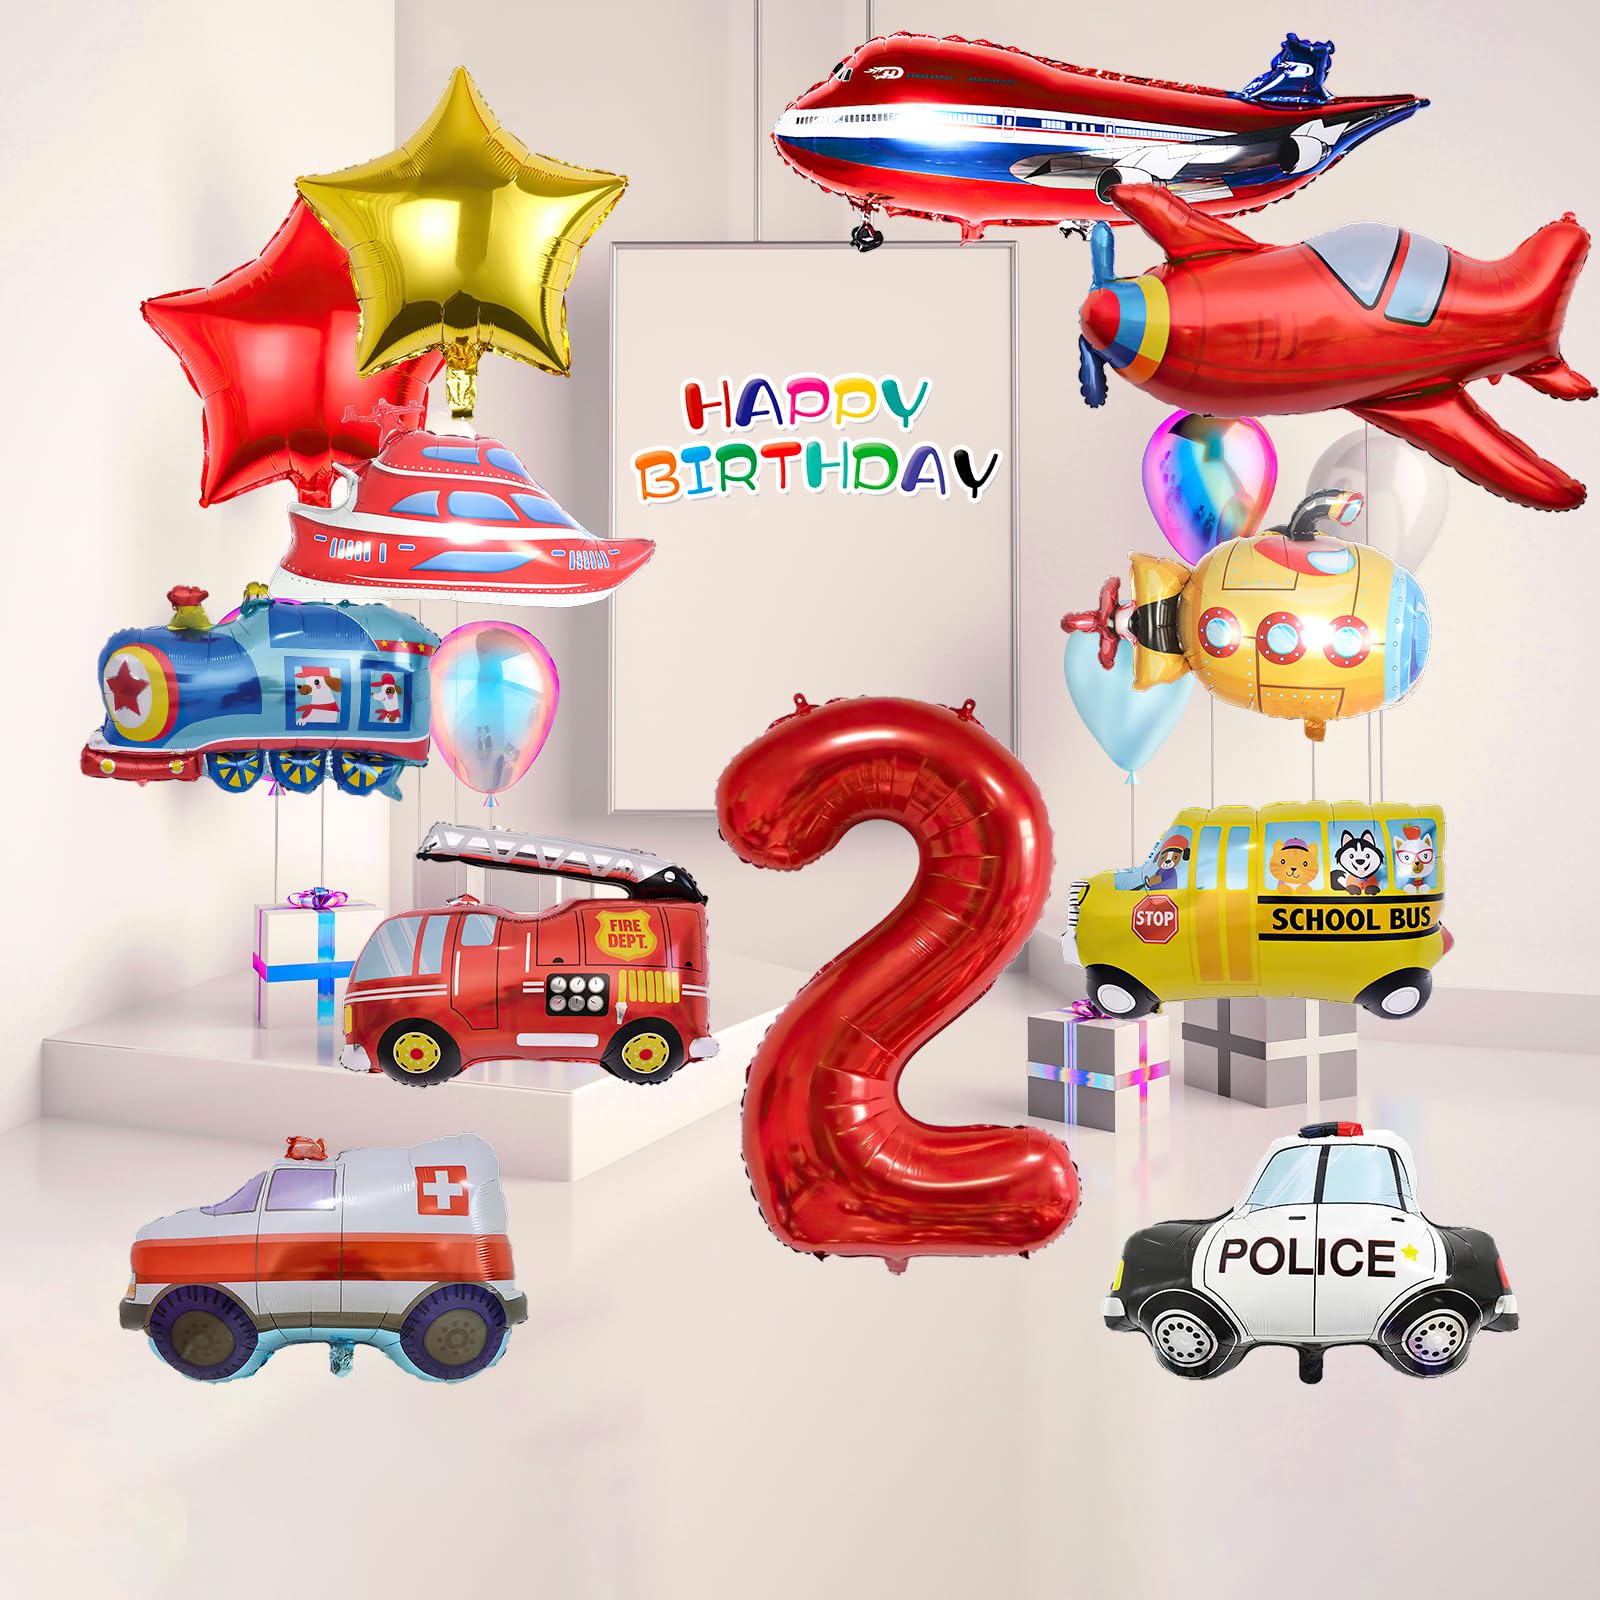 12pcs Transportation Truck Plane School Bus Fire Truck Police Car Ship Ambulance Submarine Birthday Number Foil Balloon for Transportation 2nd Birthday Vehicles Theme Party Supplies Decorations (2nd)